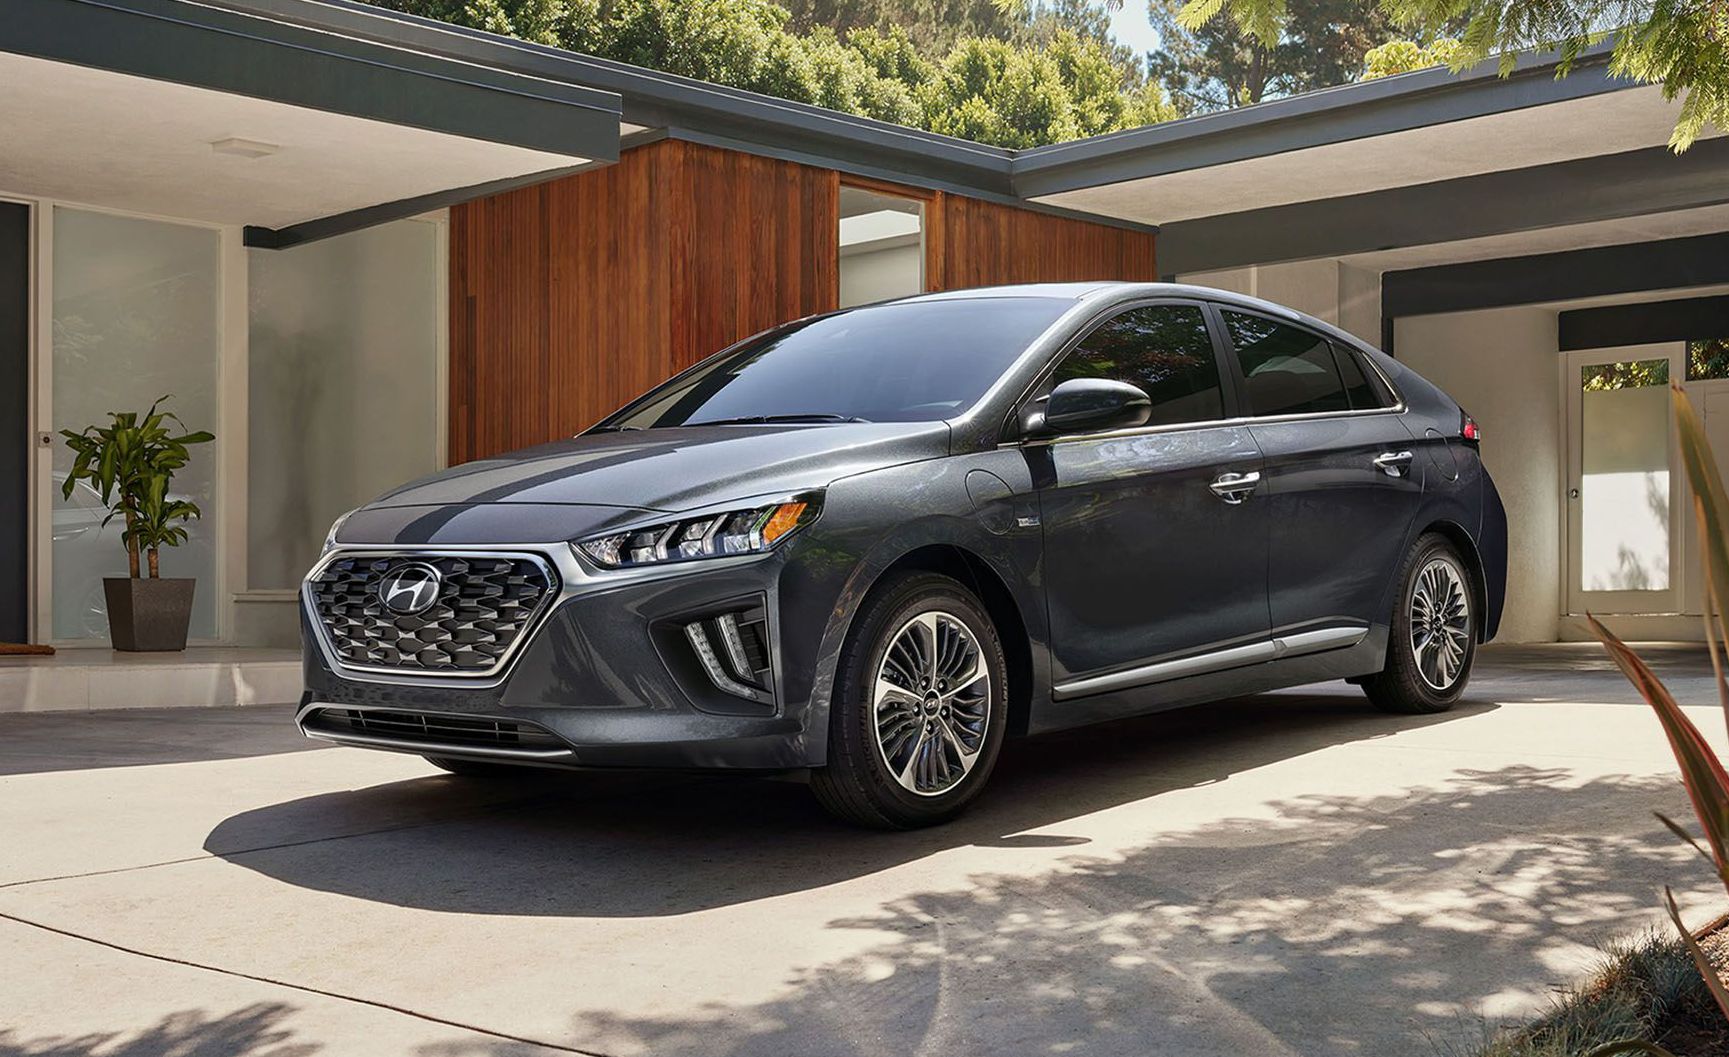 Occlusie Voorwoord silhouet 2020 Hyundai Ioniq Review, Pricing, and Specs